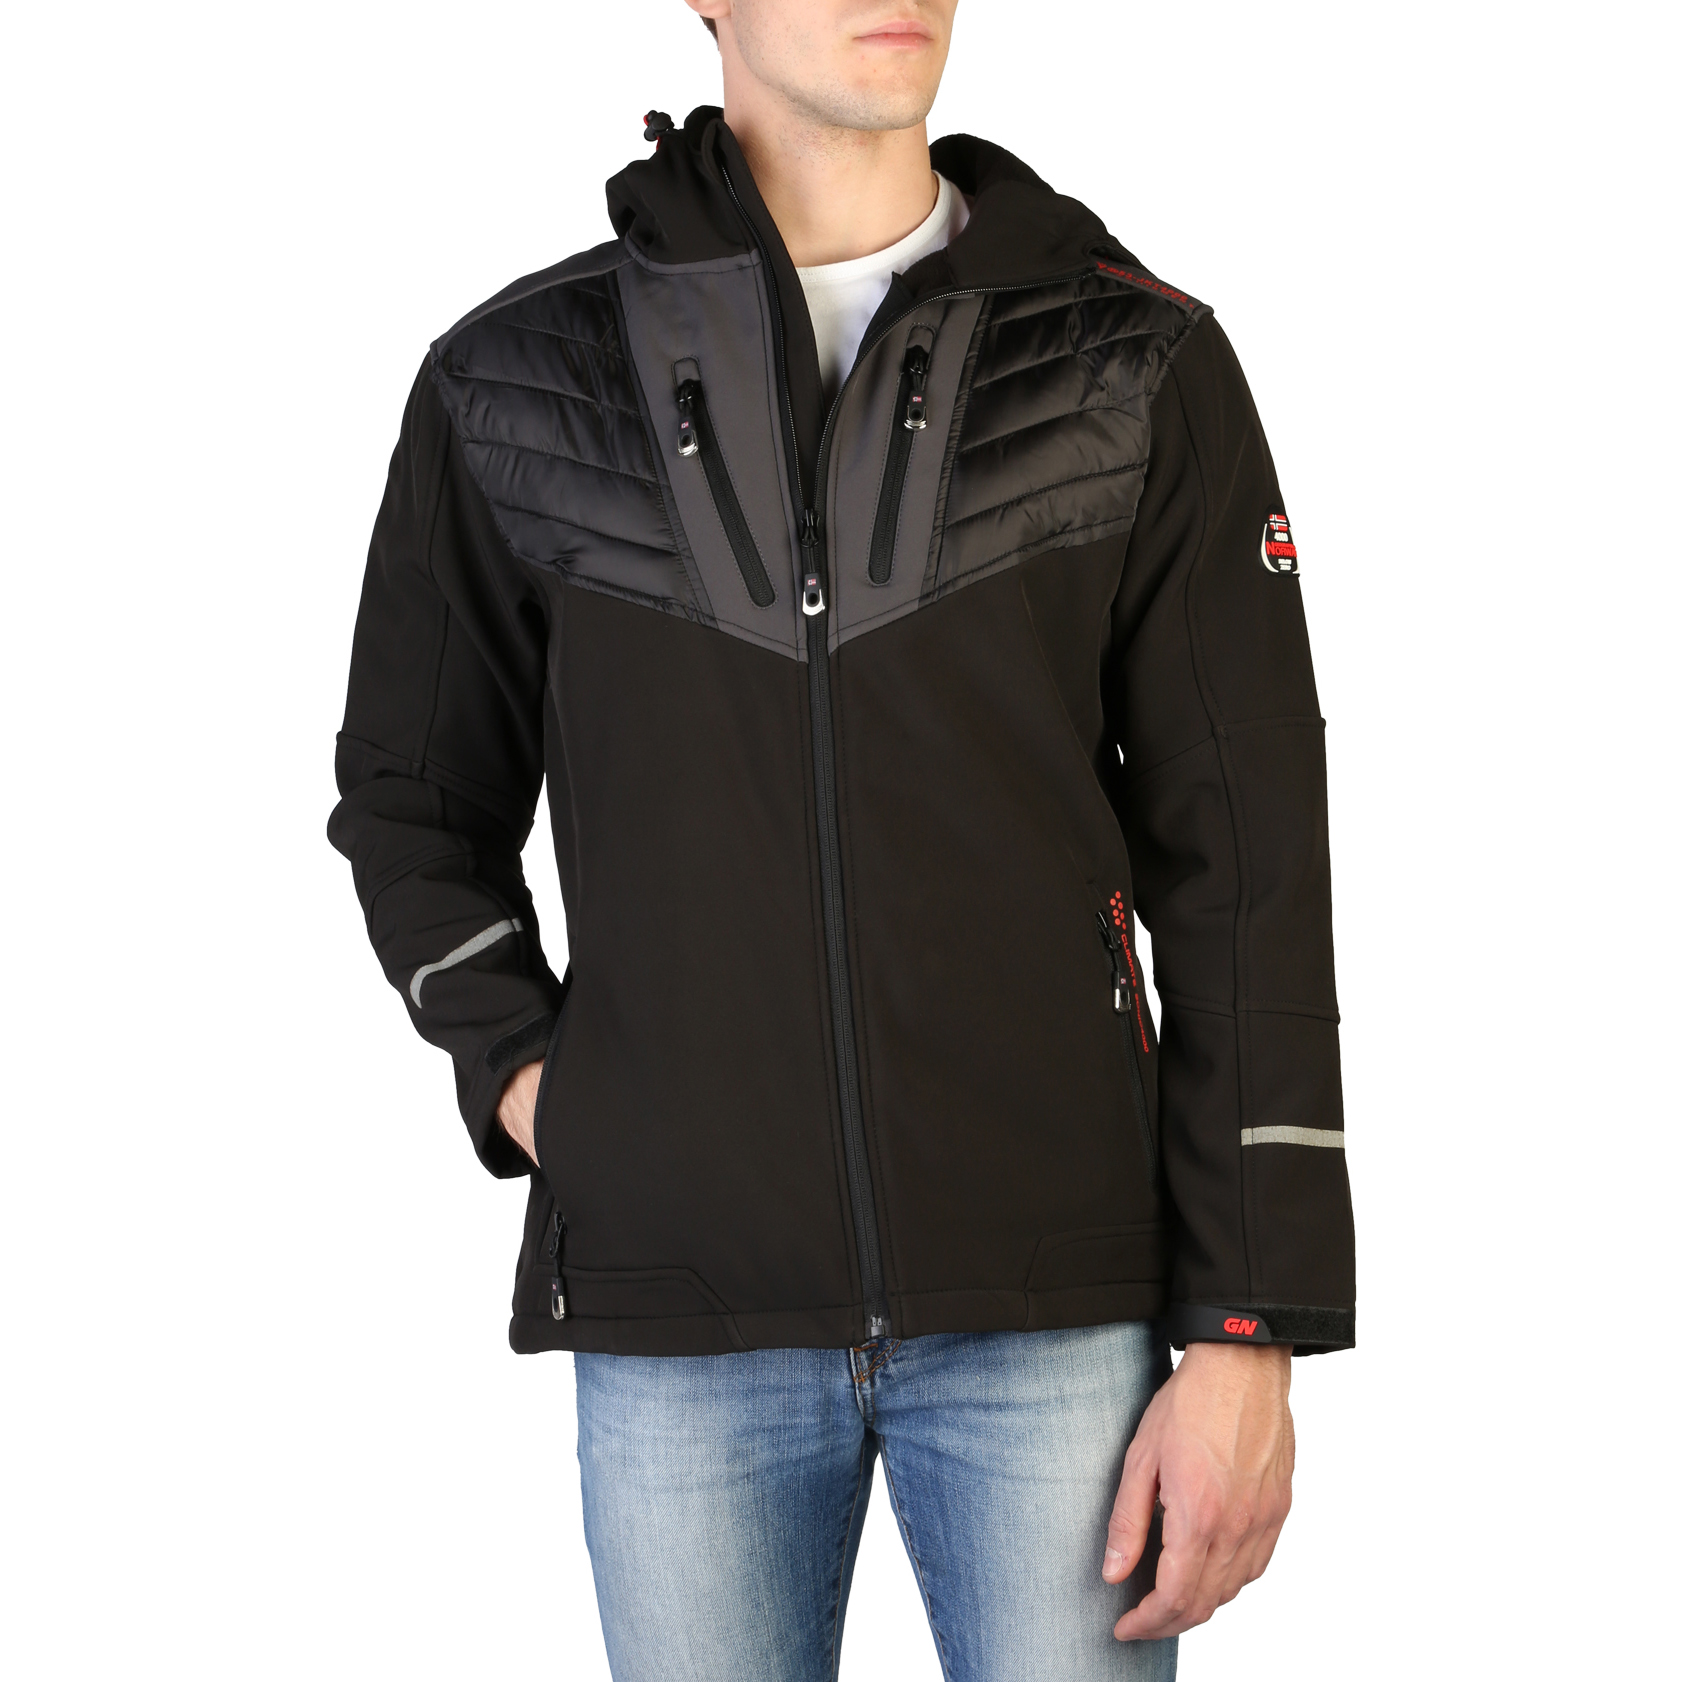 Geographical Norway Tarknight man